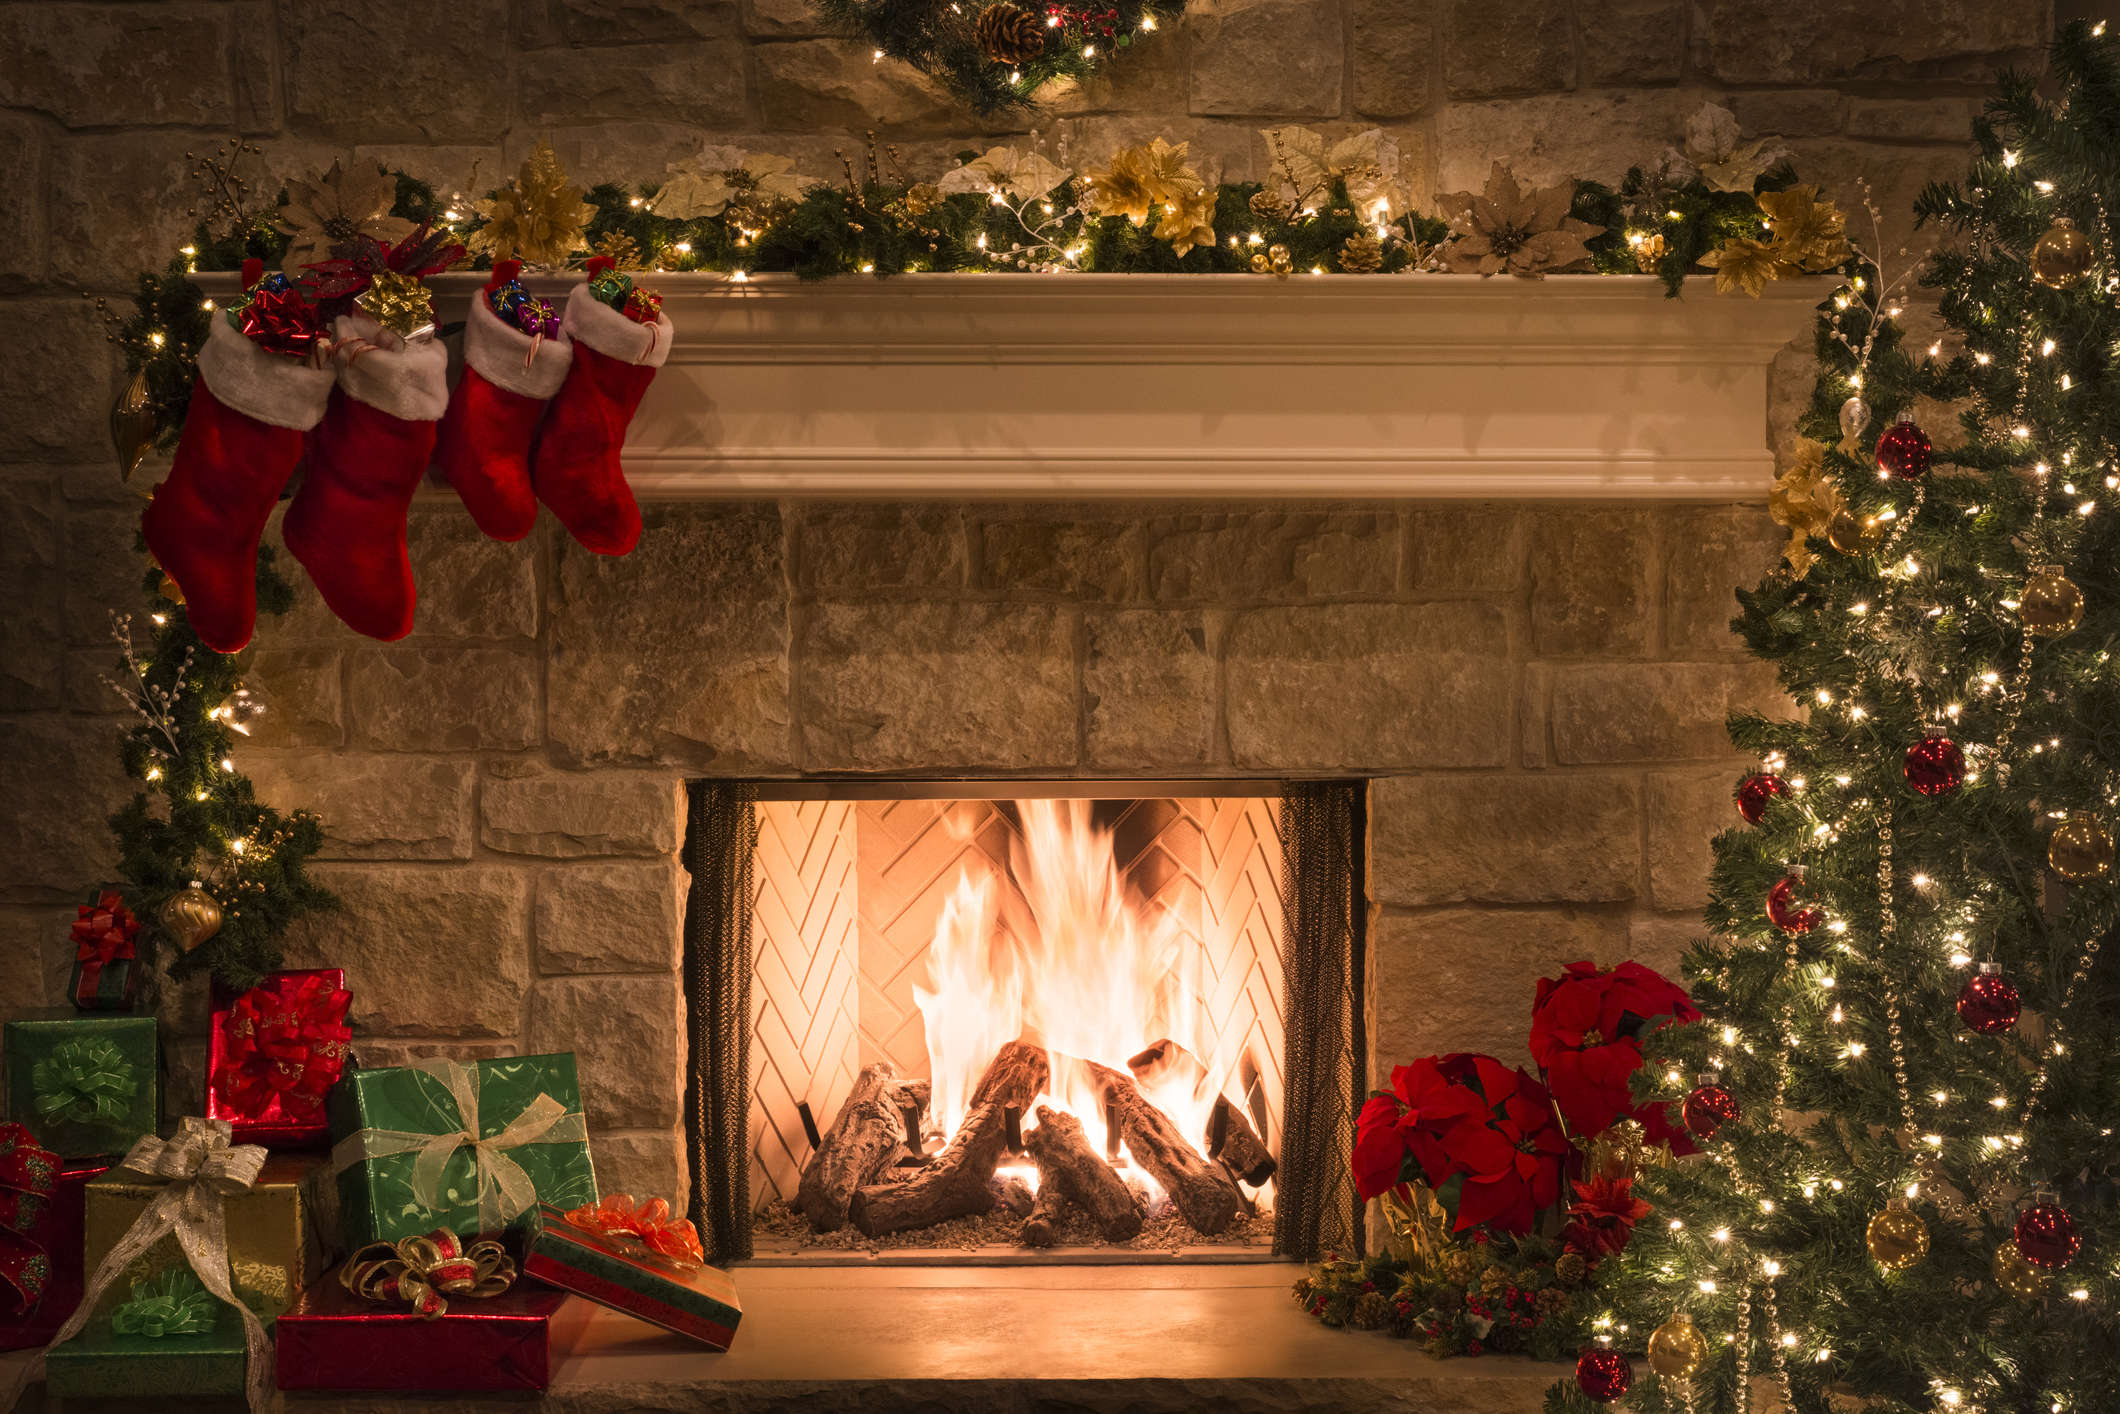 Christmas fireplace, stockings, gifts, tree, copy space - Lisa Lisson ...